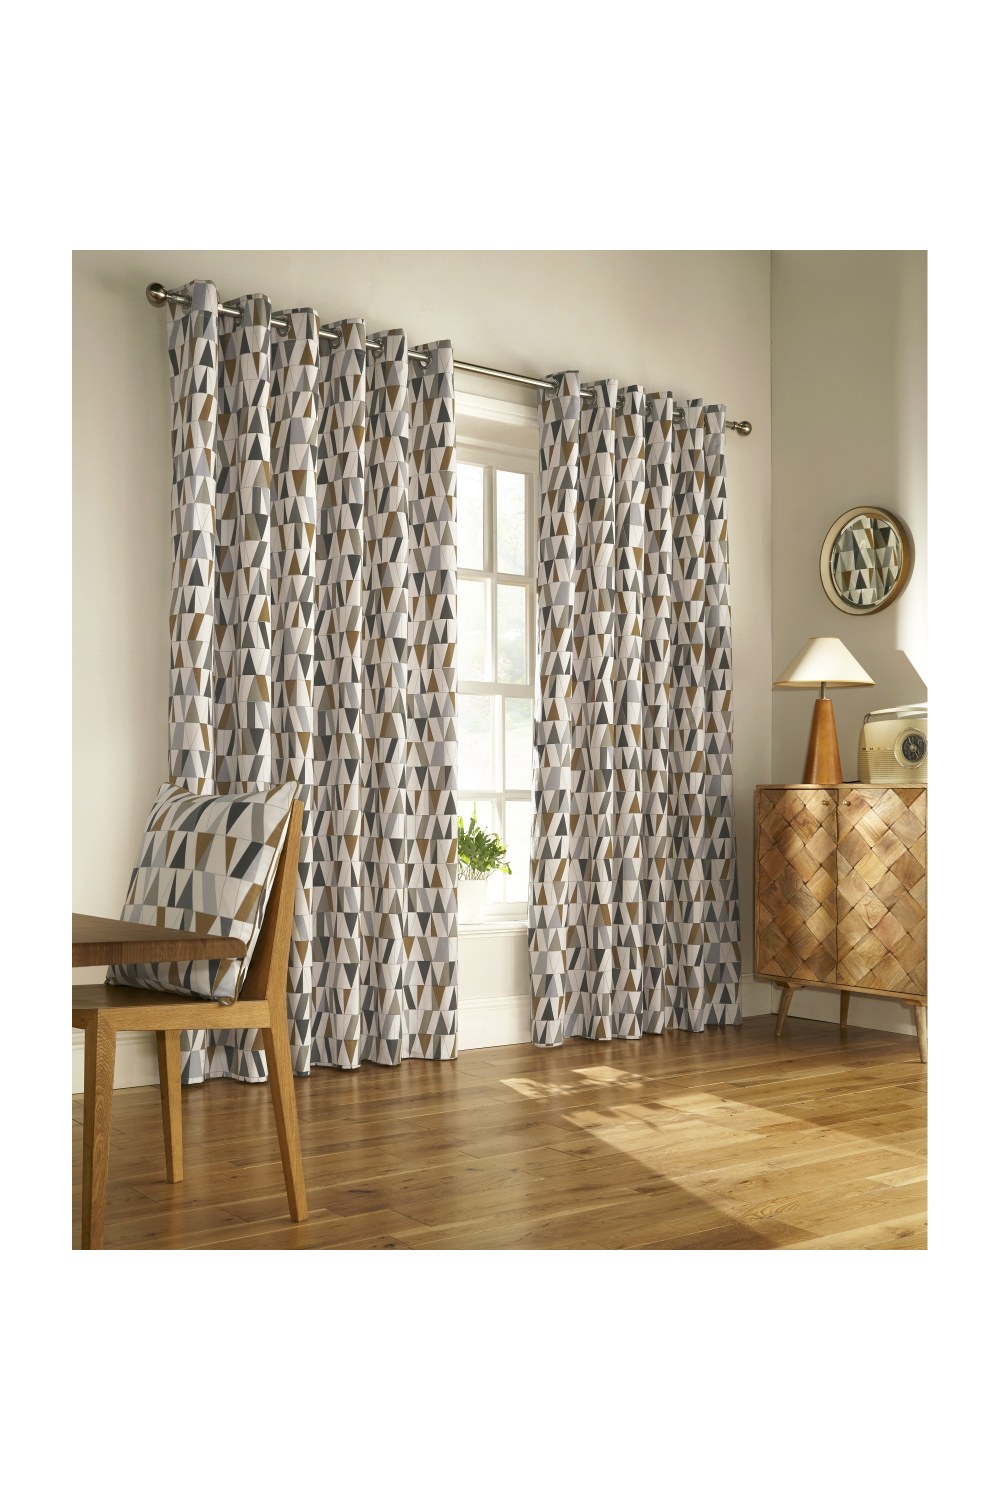 Furn Reno Ringtop Geometric Eyelet Curtains (Charcoal/Gold) (66in x 54in)